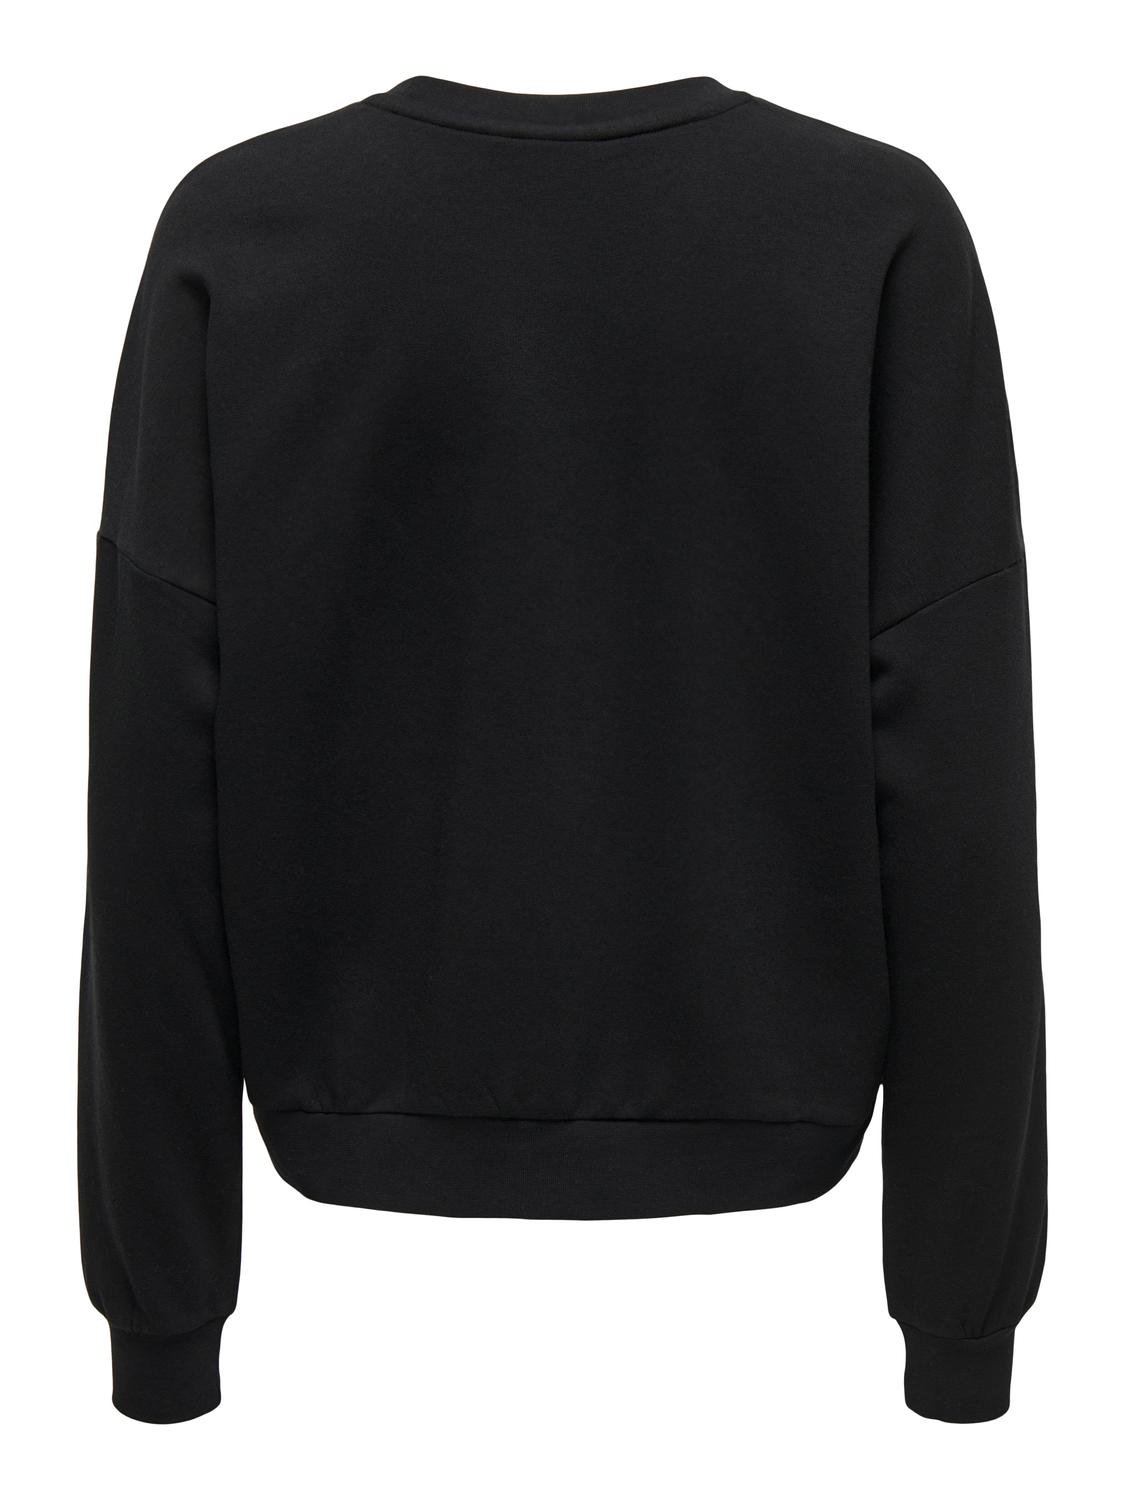 ONLY O-neck sweatshirt with print -Black - 15304312